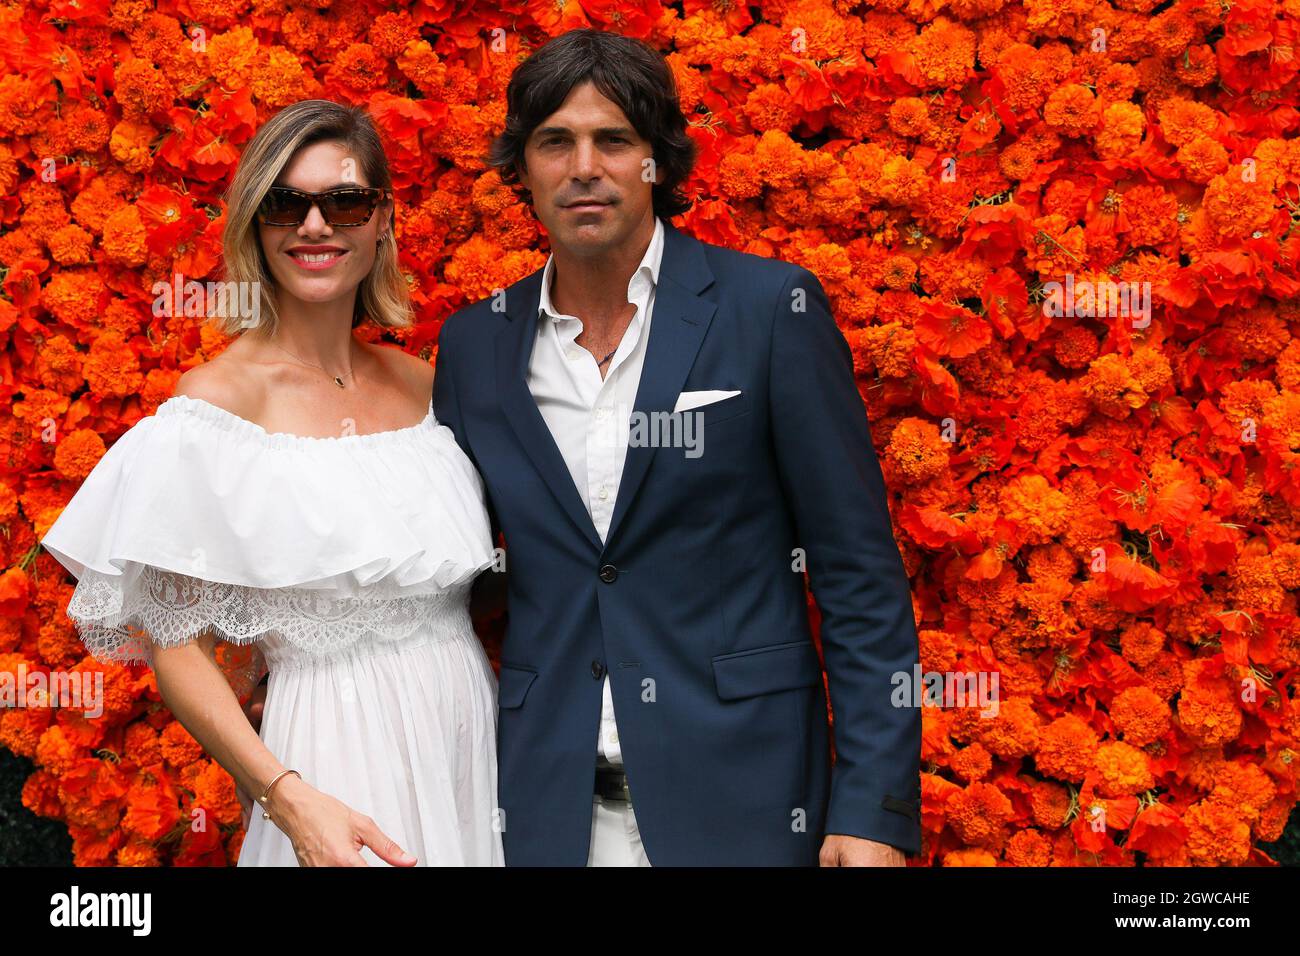 Delfi Blaquier and Ignacio 'Nacho' Figueras arrive at The Veuve Clicquot Polo Classic at Will Rogers State Historic Park in Los Angeles, California on October 2, 2021. (Photo by Conor Duffy/Sipa USA) Stock Photo